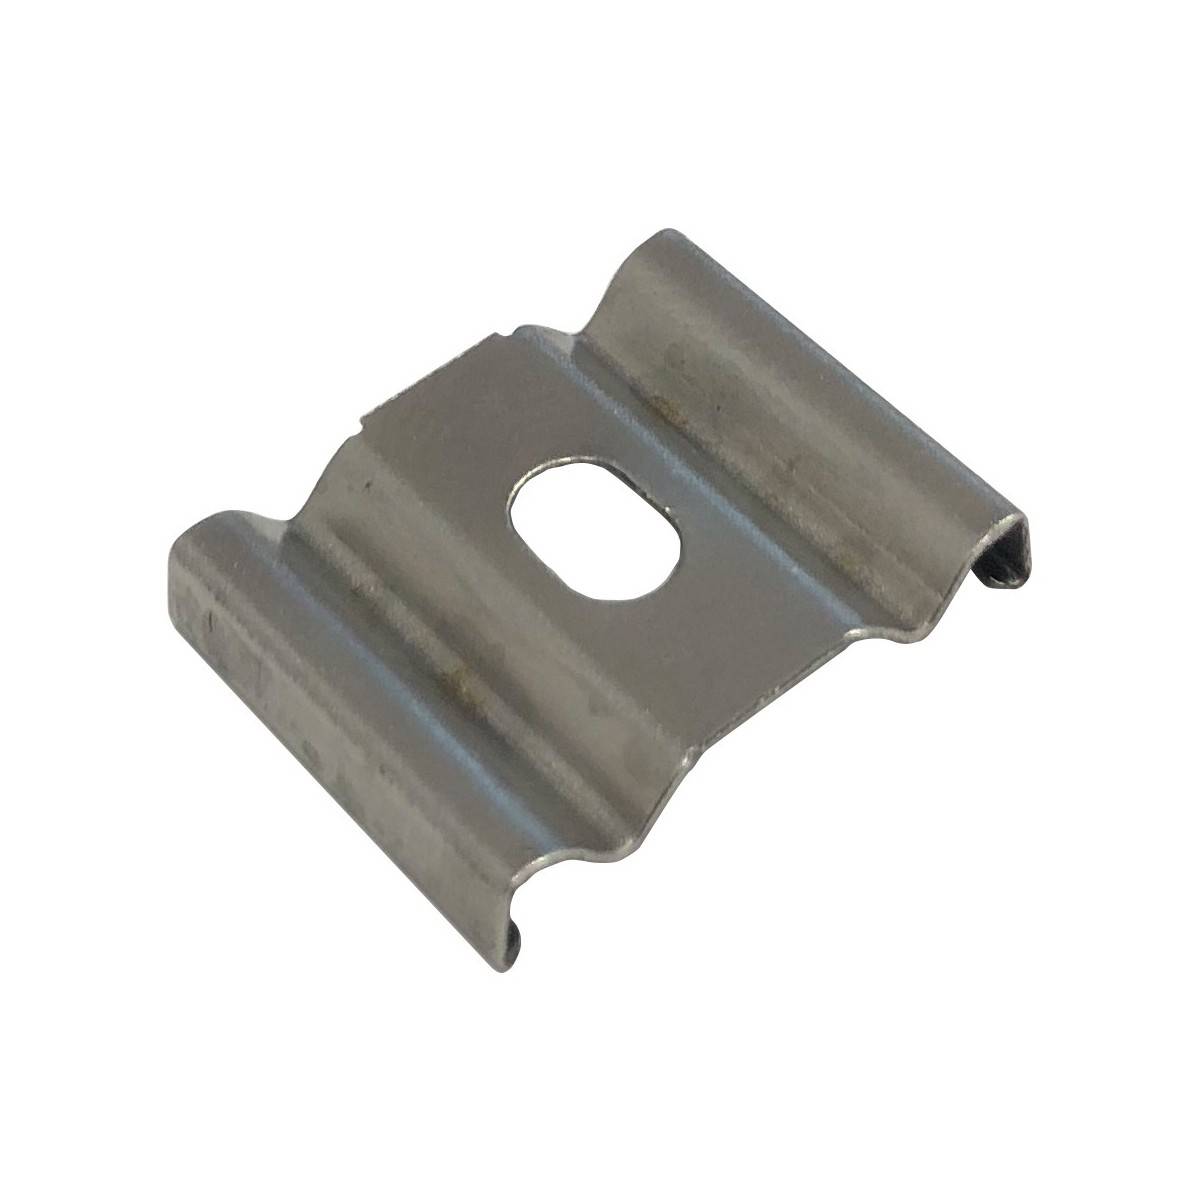 METAL CLAMP FOR FASTENING FLEXIBLE PROFILE 18X6MM